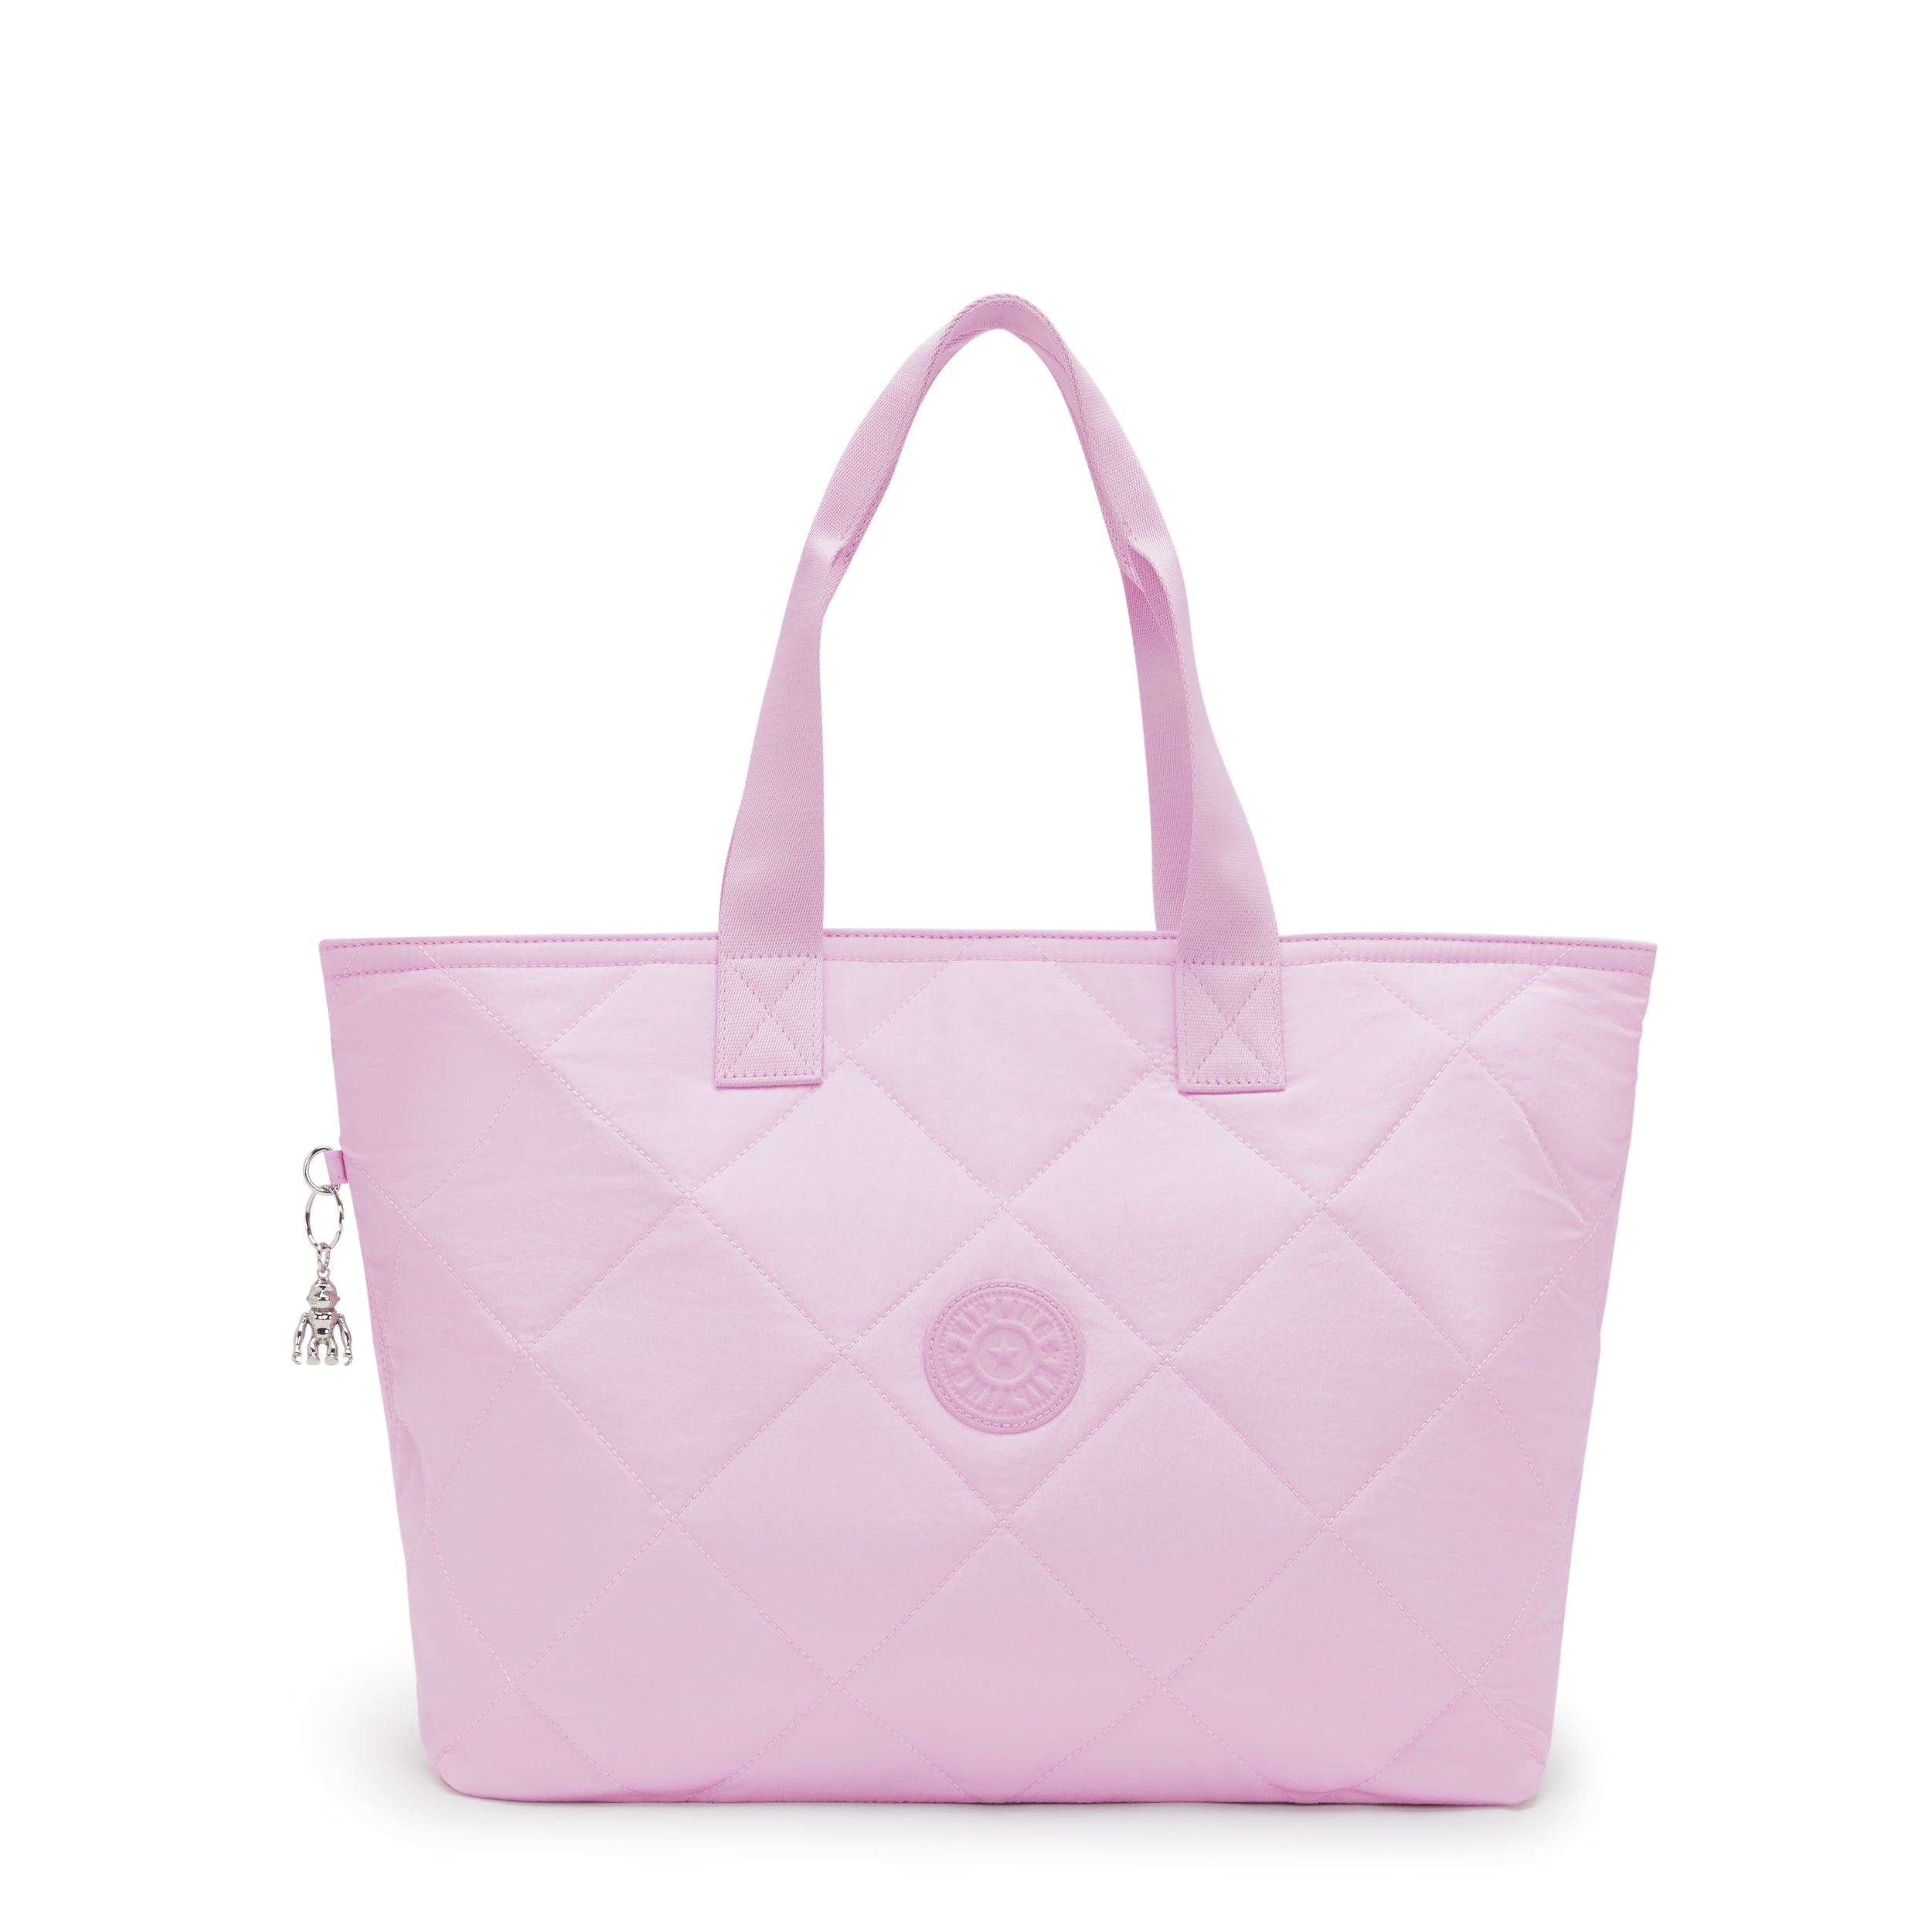 KIPLING-Colissa-Large Tote with Laptop Compartment-Blooming P Qlt-I7845-AQ1